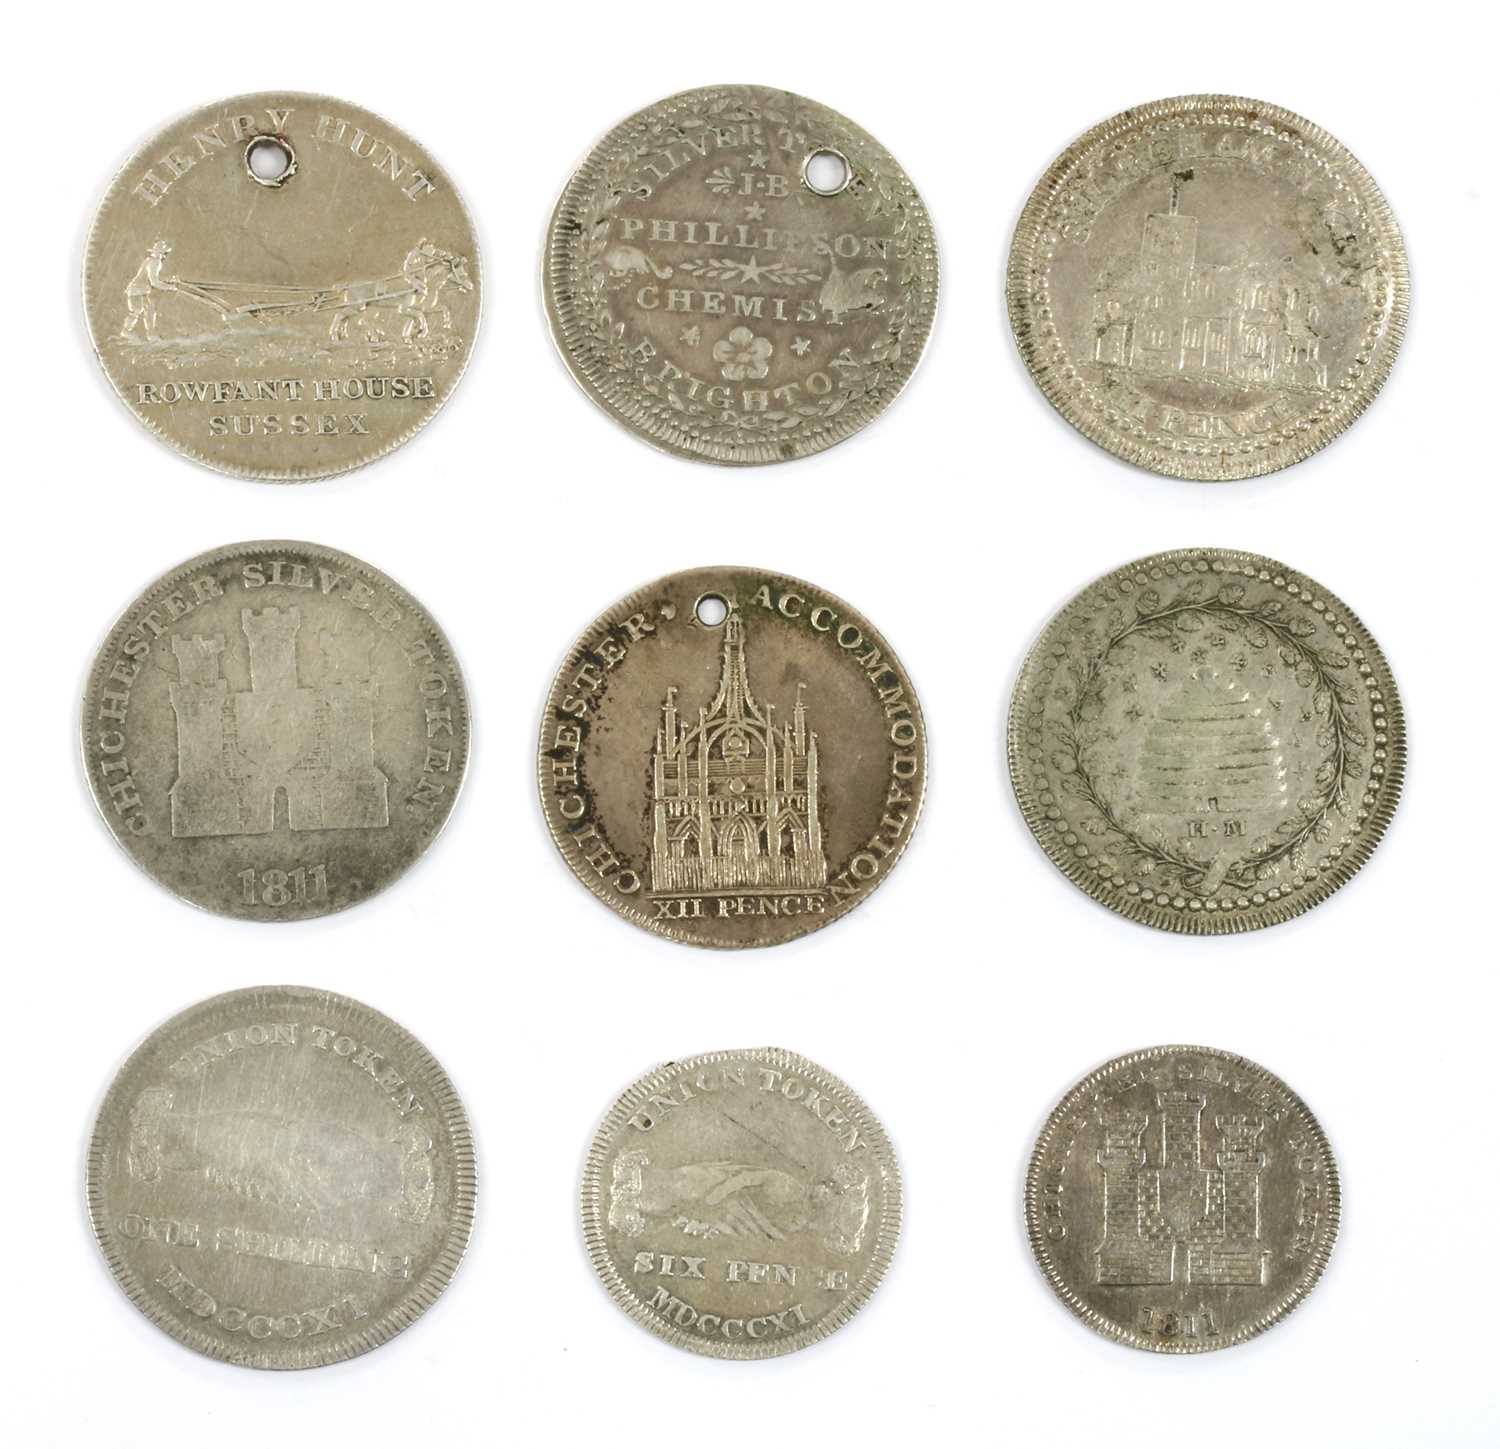 Lot 84 - Tokens, Great Britain, Sussex